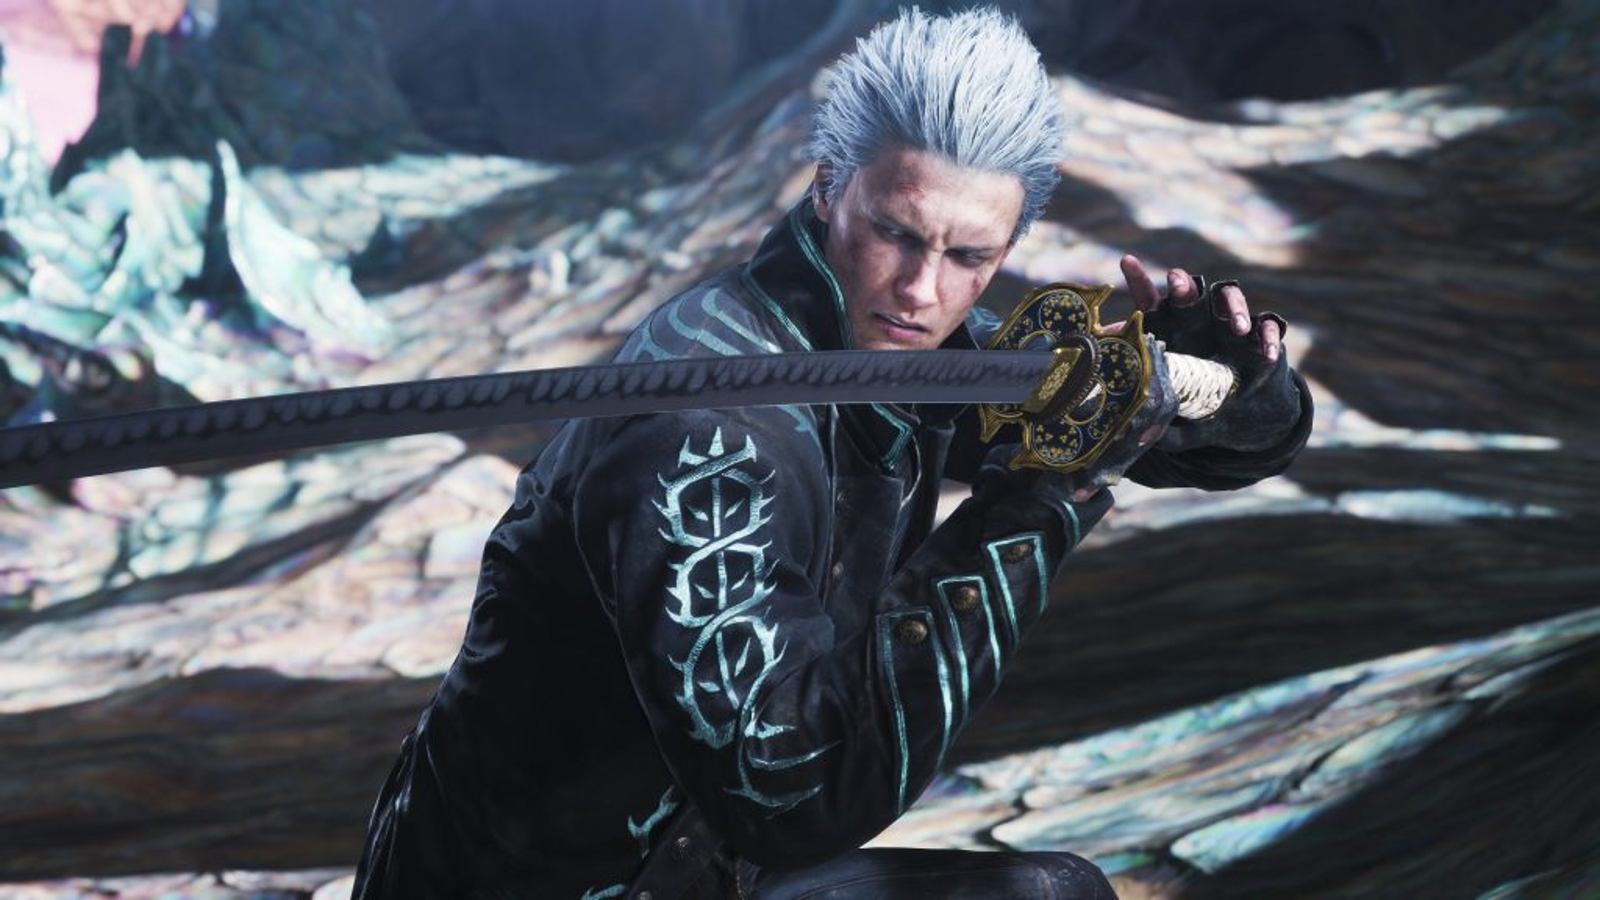 Devil May Cry 5 PC Technical Review - Your PC Won't Cry